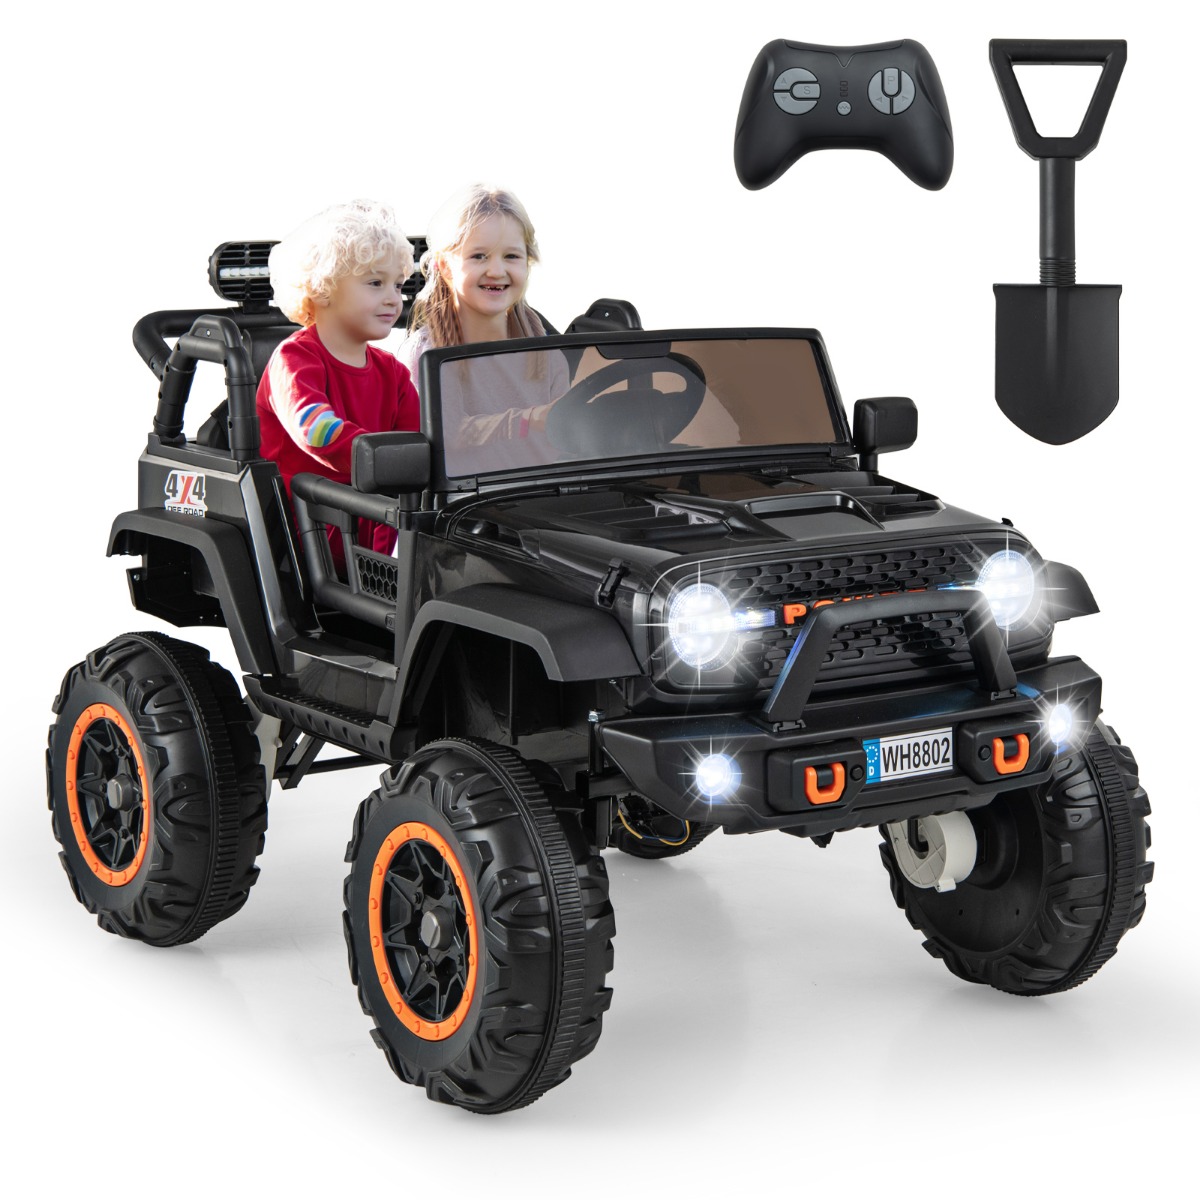 2-Seater Ride On Car with Remote Control and Horn for Boys and Girls-Black